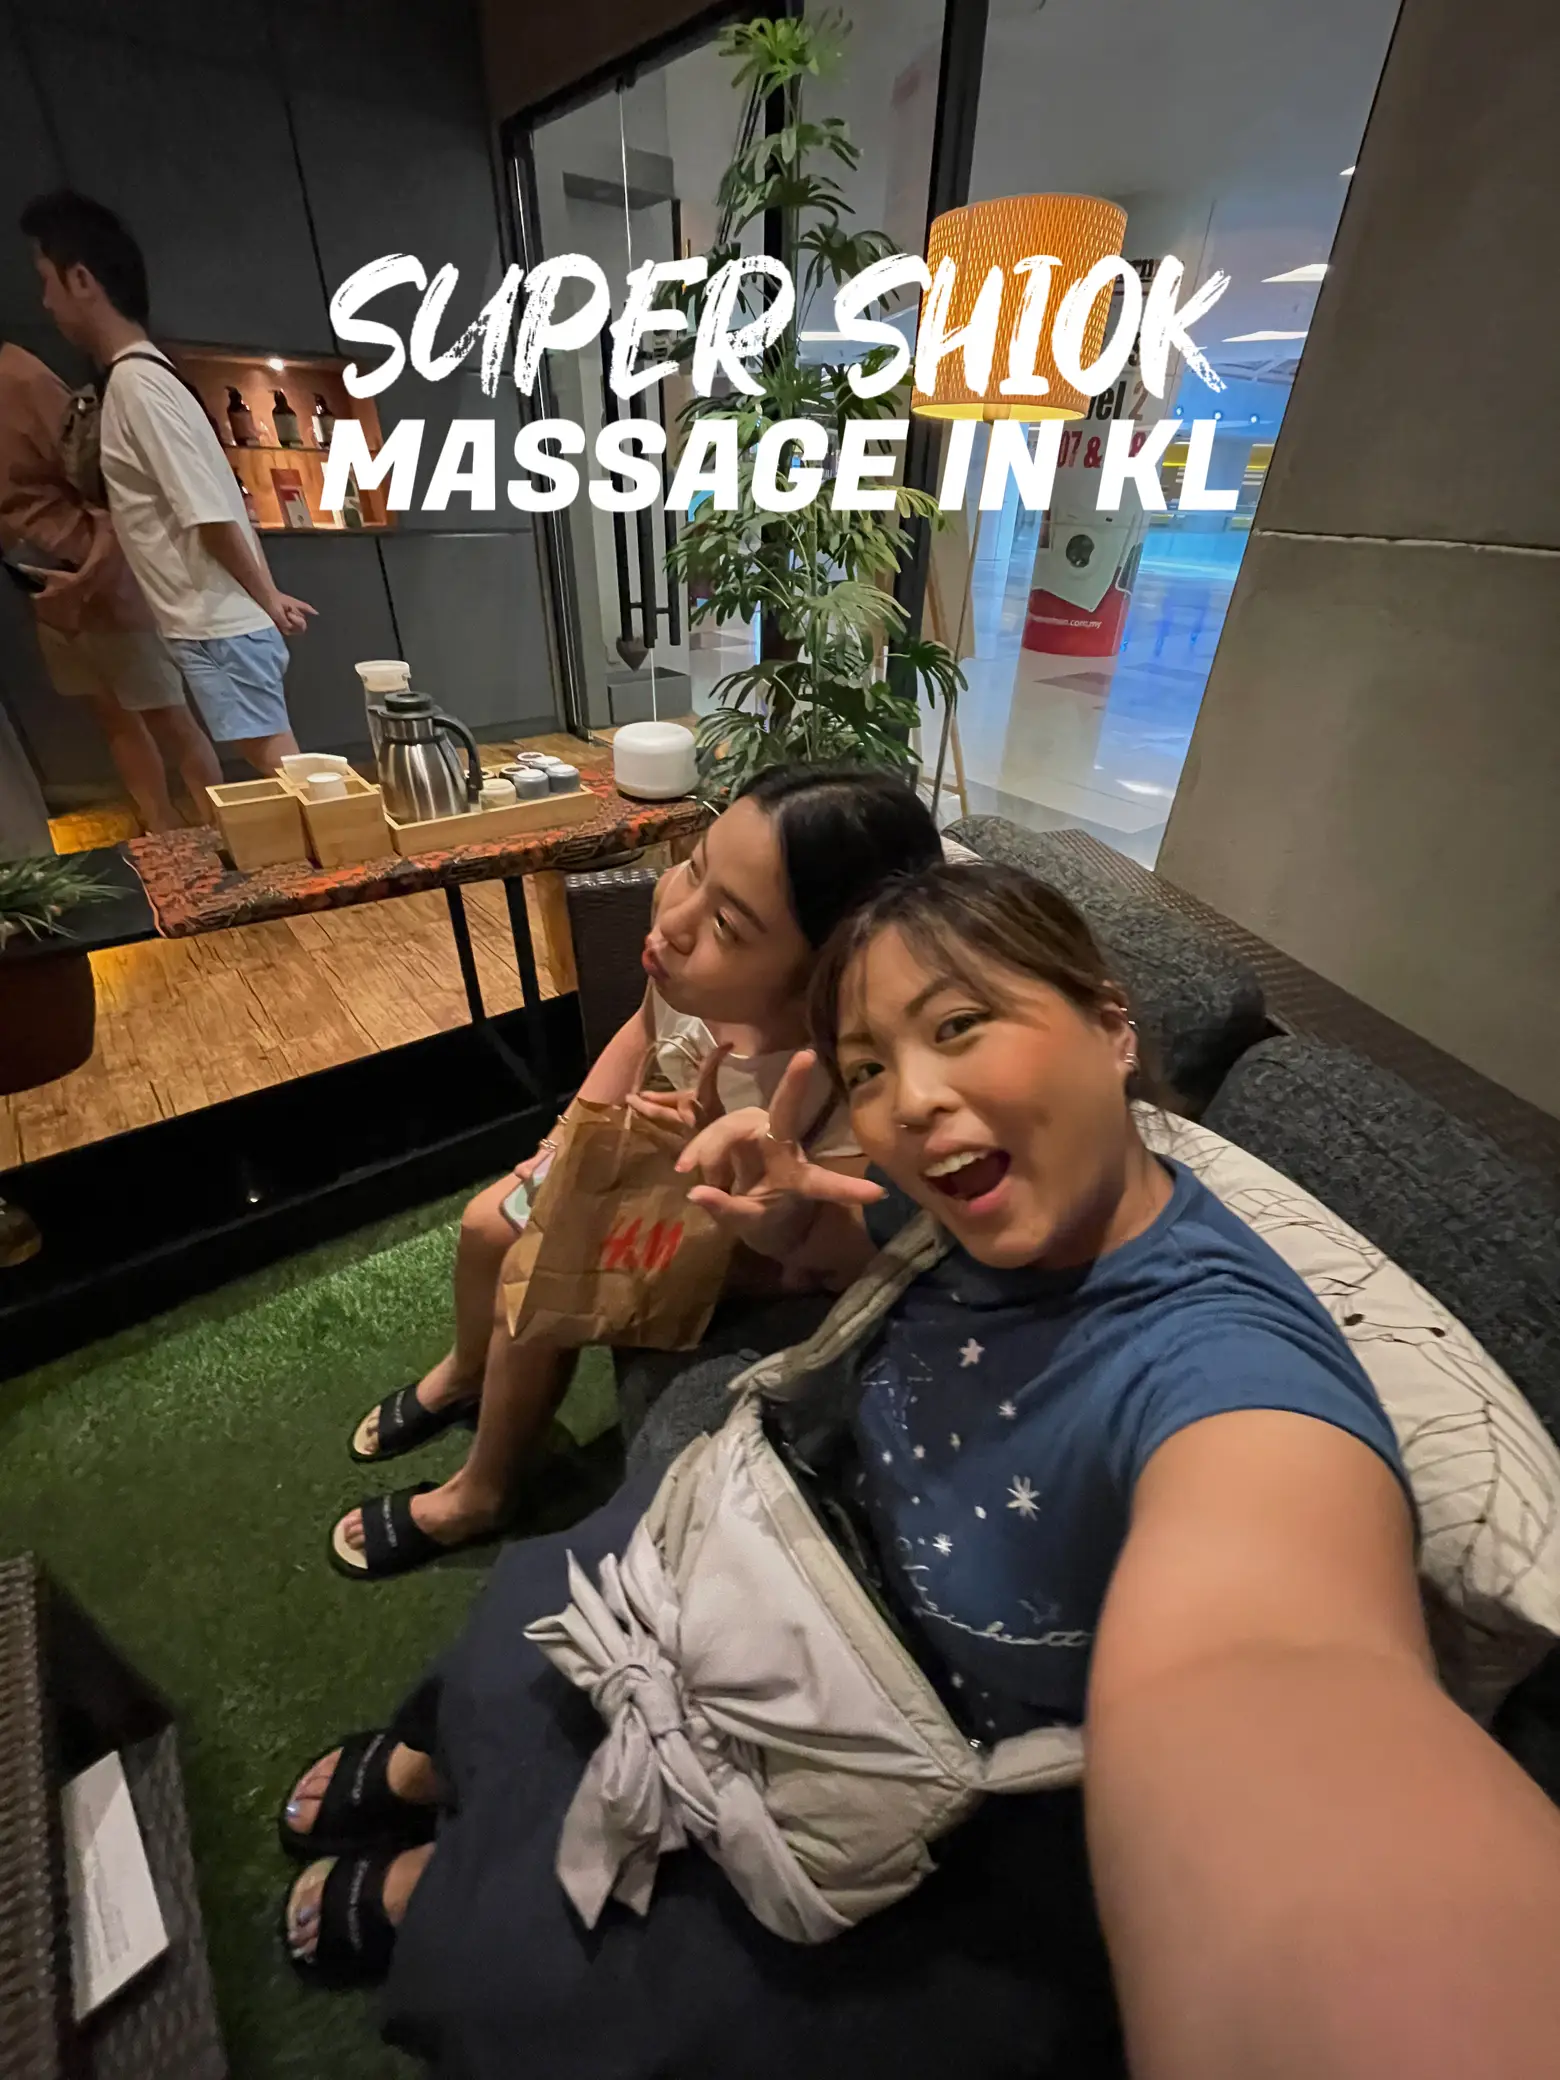 THE MASSAGE IN KL THAT HEALED ME 😩's images(0)